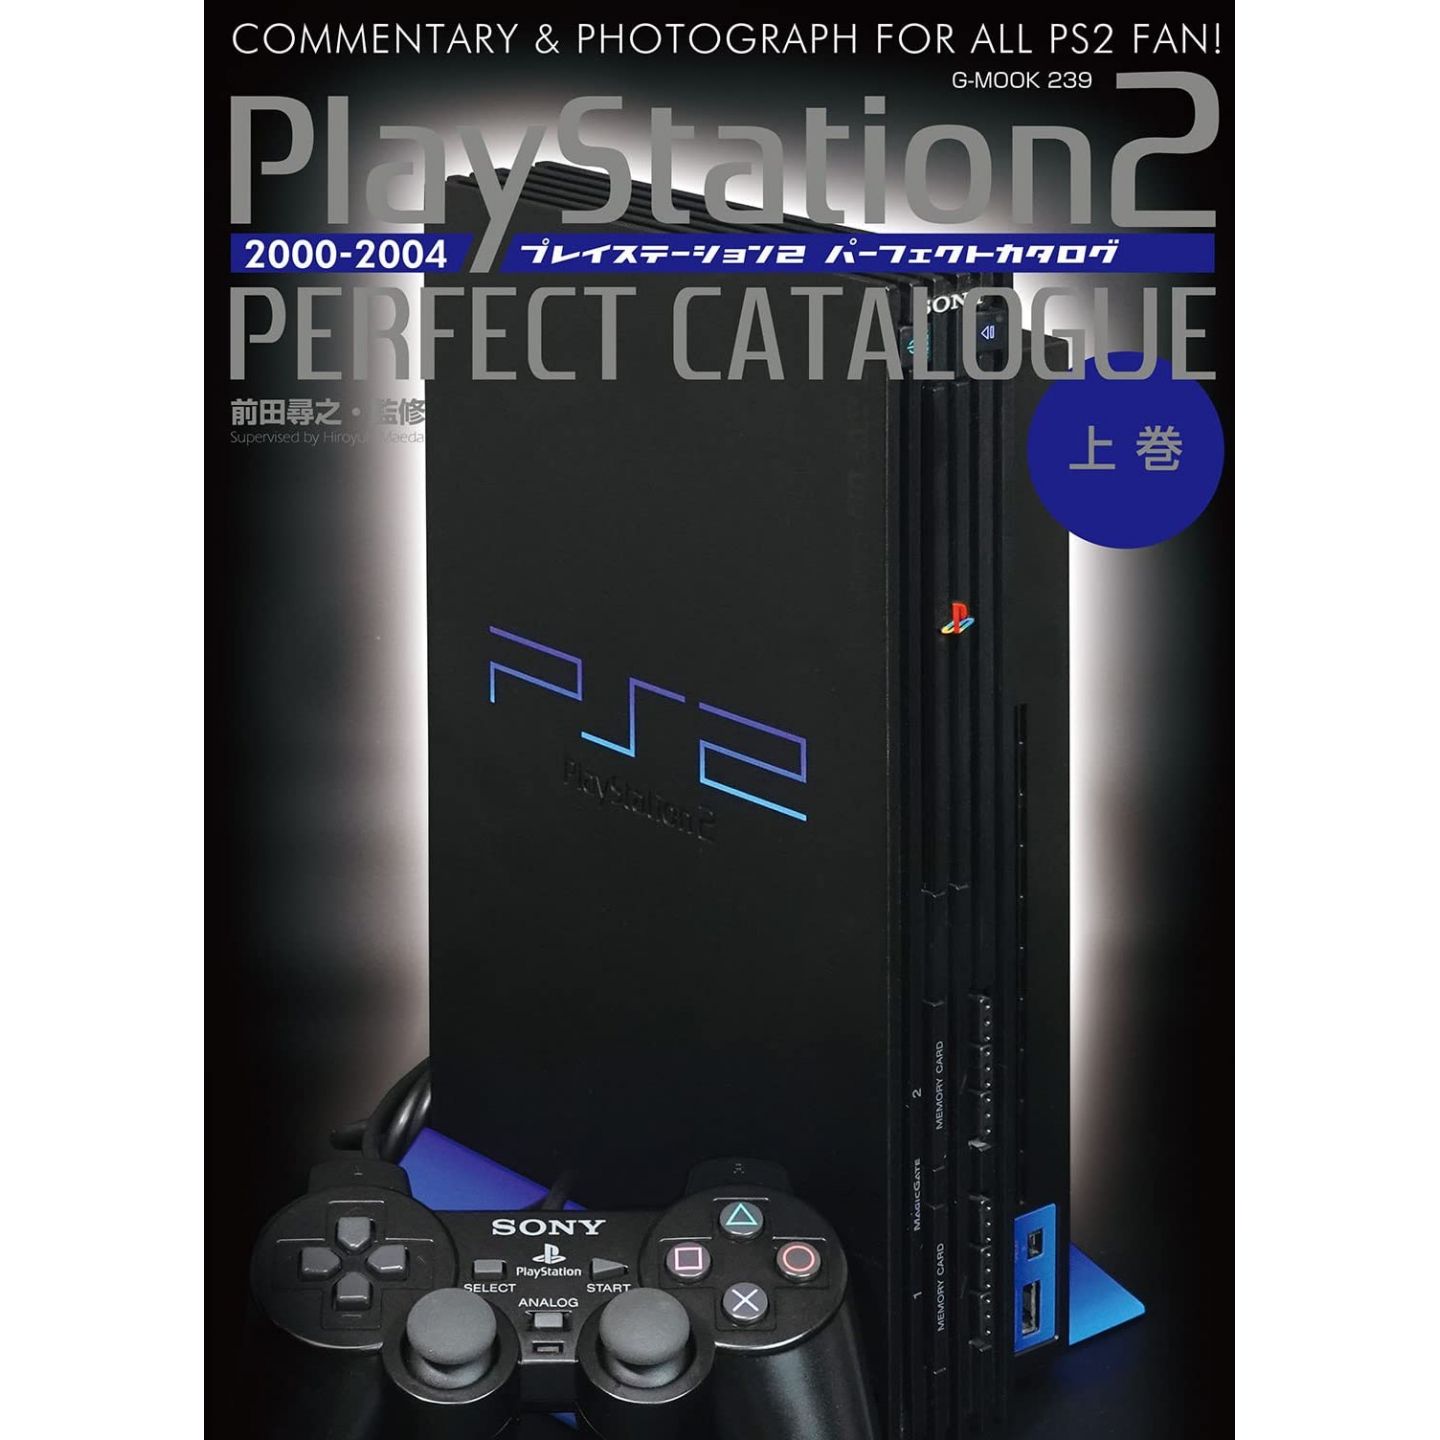 Mook - Sony Playstation 2 Perfect (Part1 2000-2004) - Commentary & Photograph for All PS2 Fan